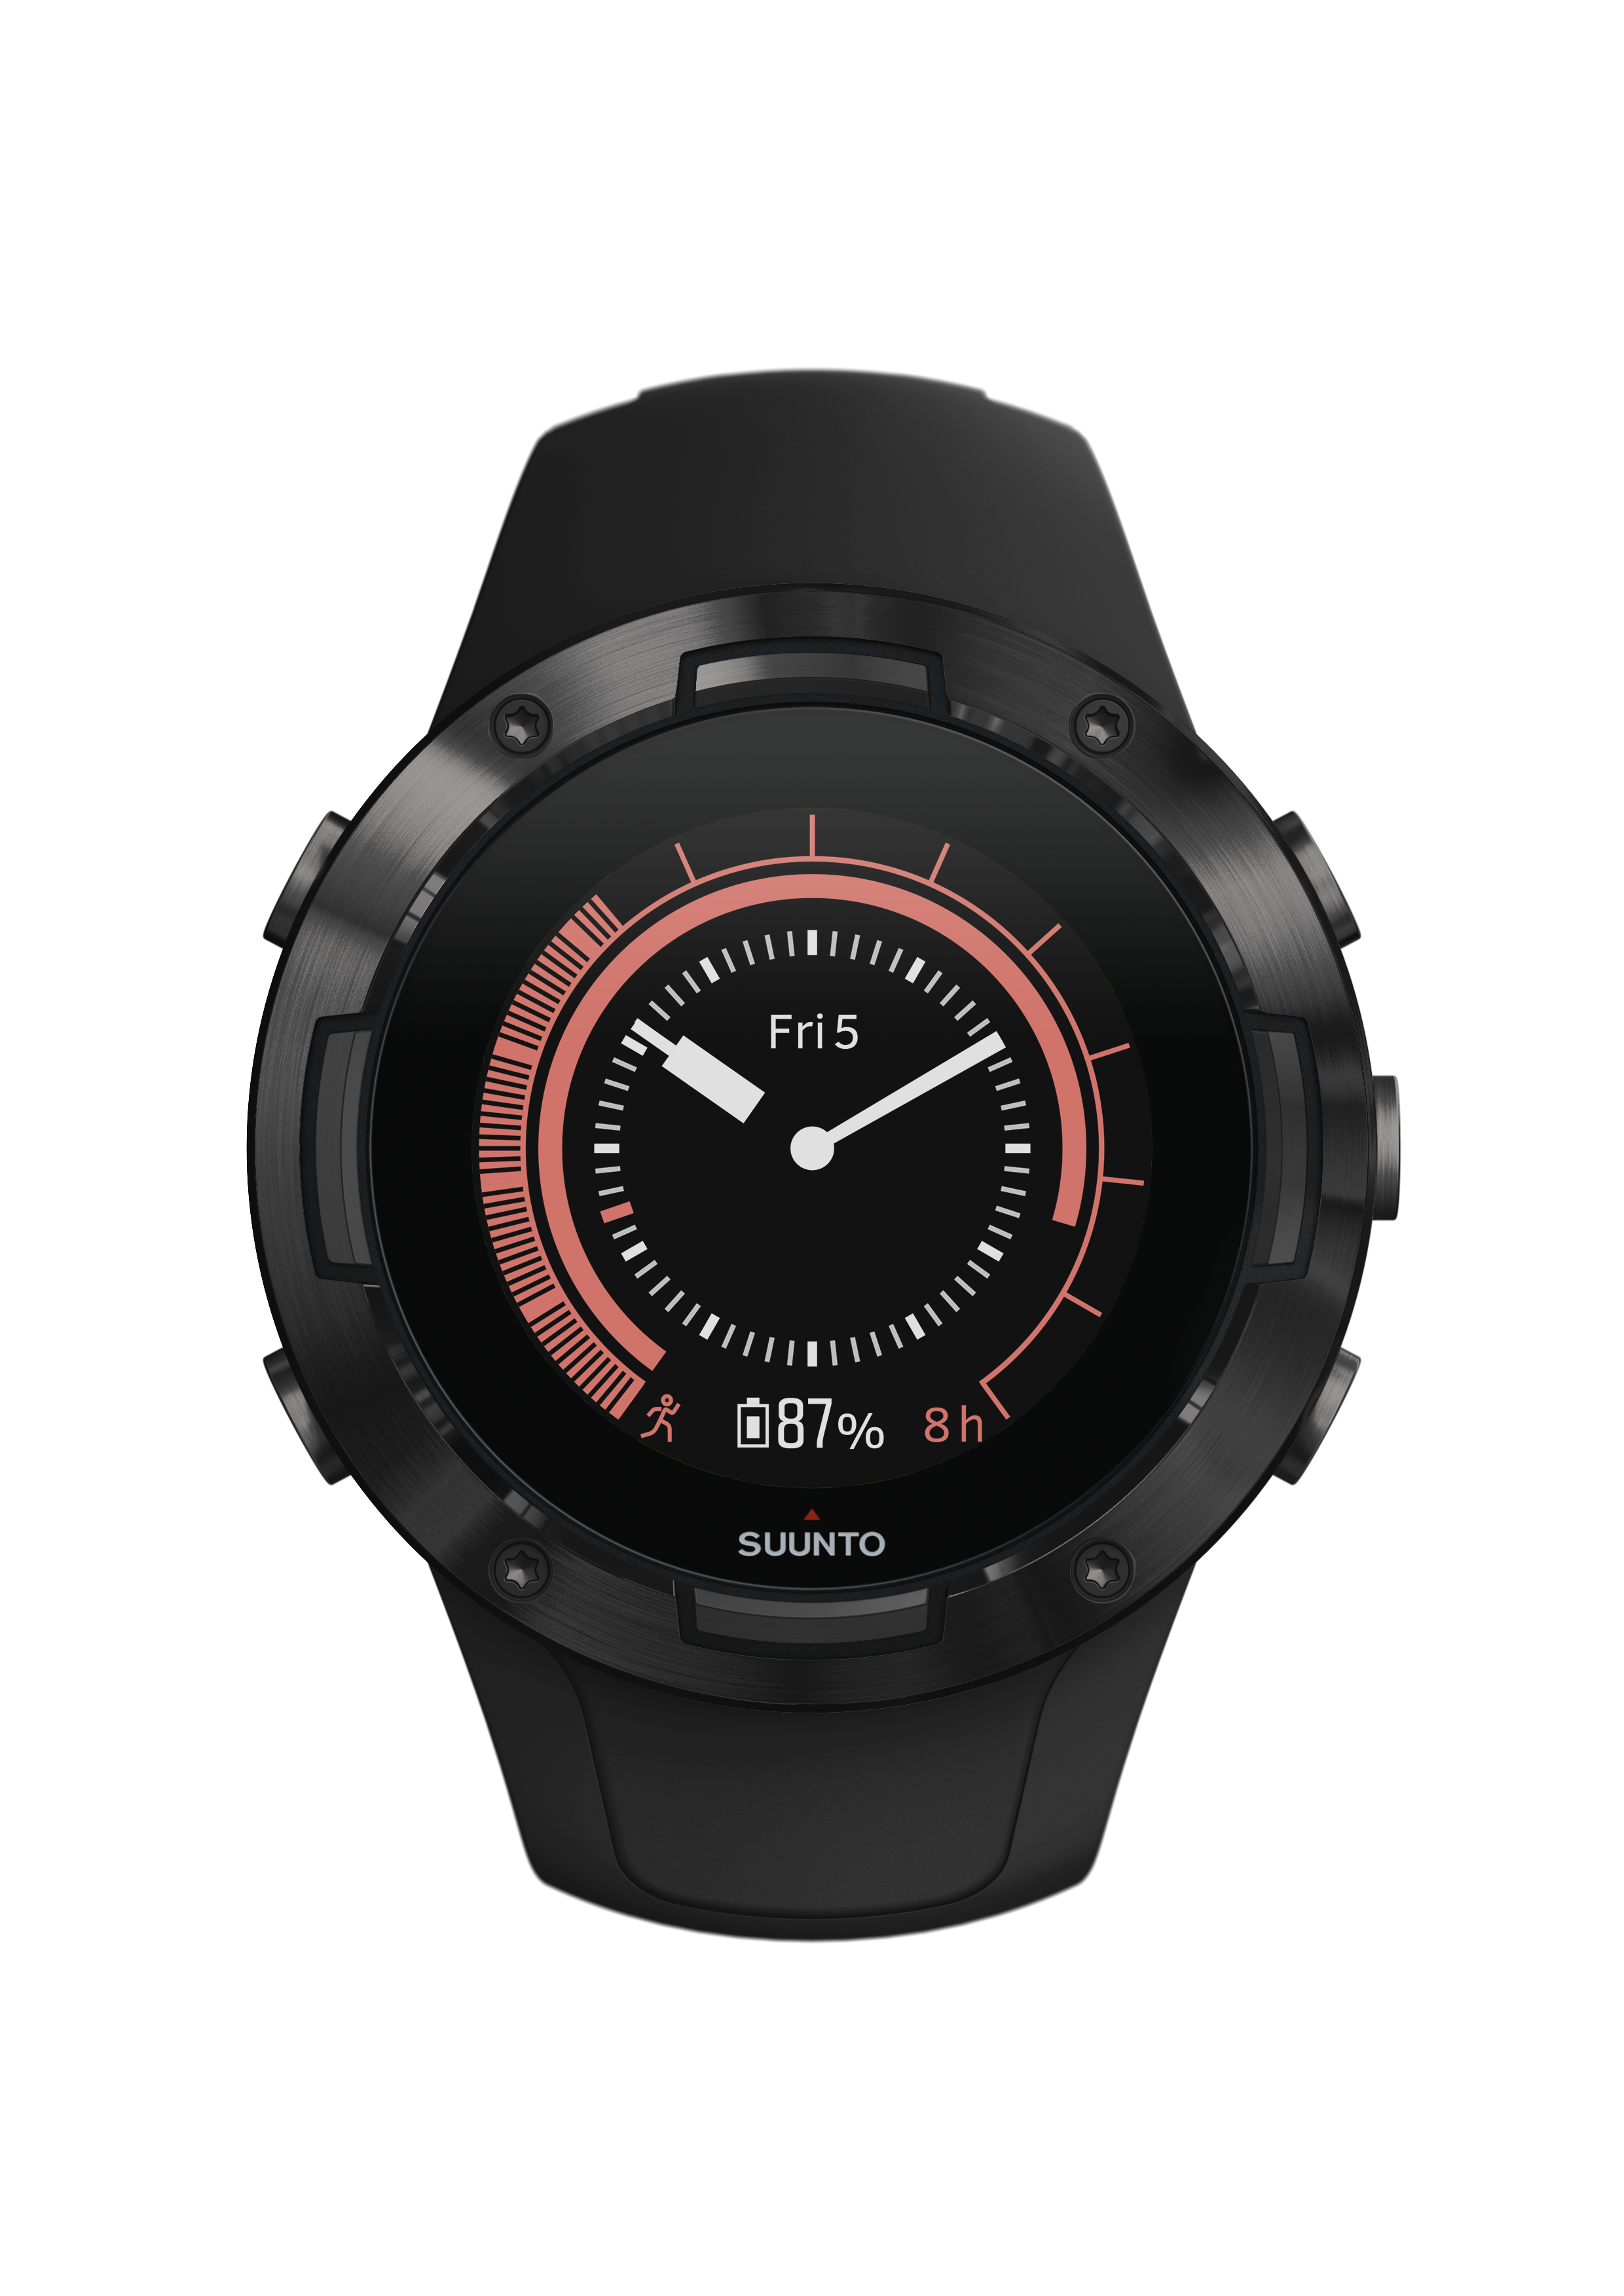 Suunto 5 GPS Watch Is Loaded With Features at an Affordable Price